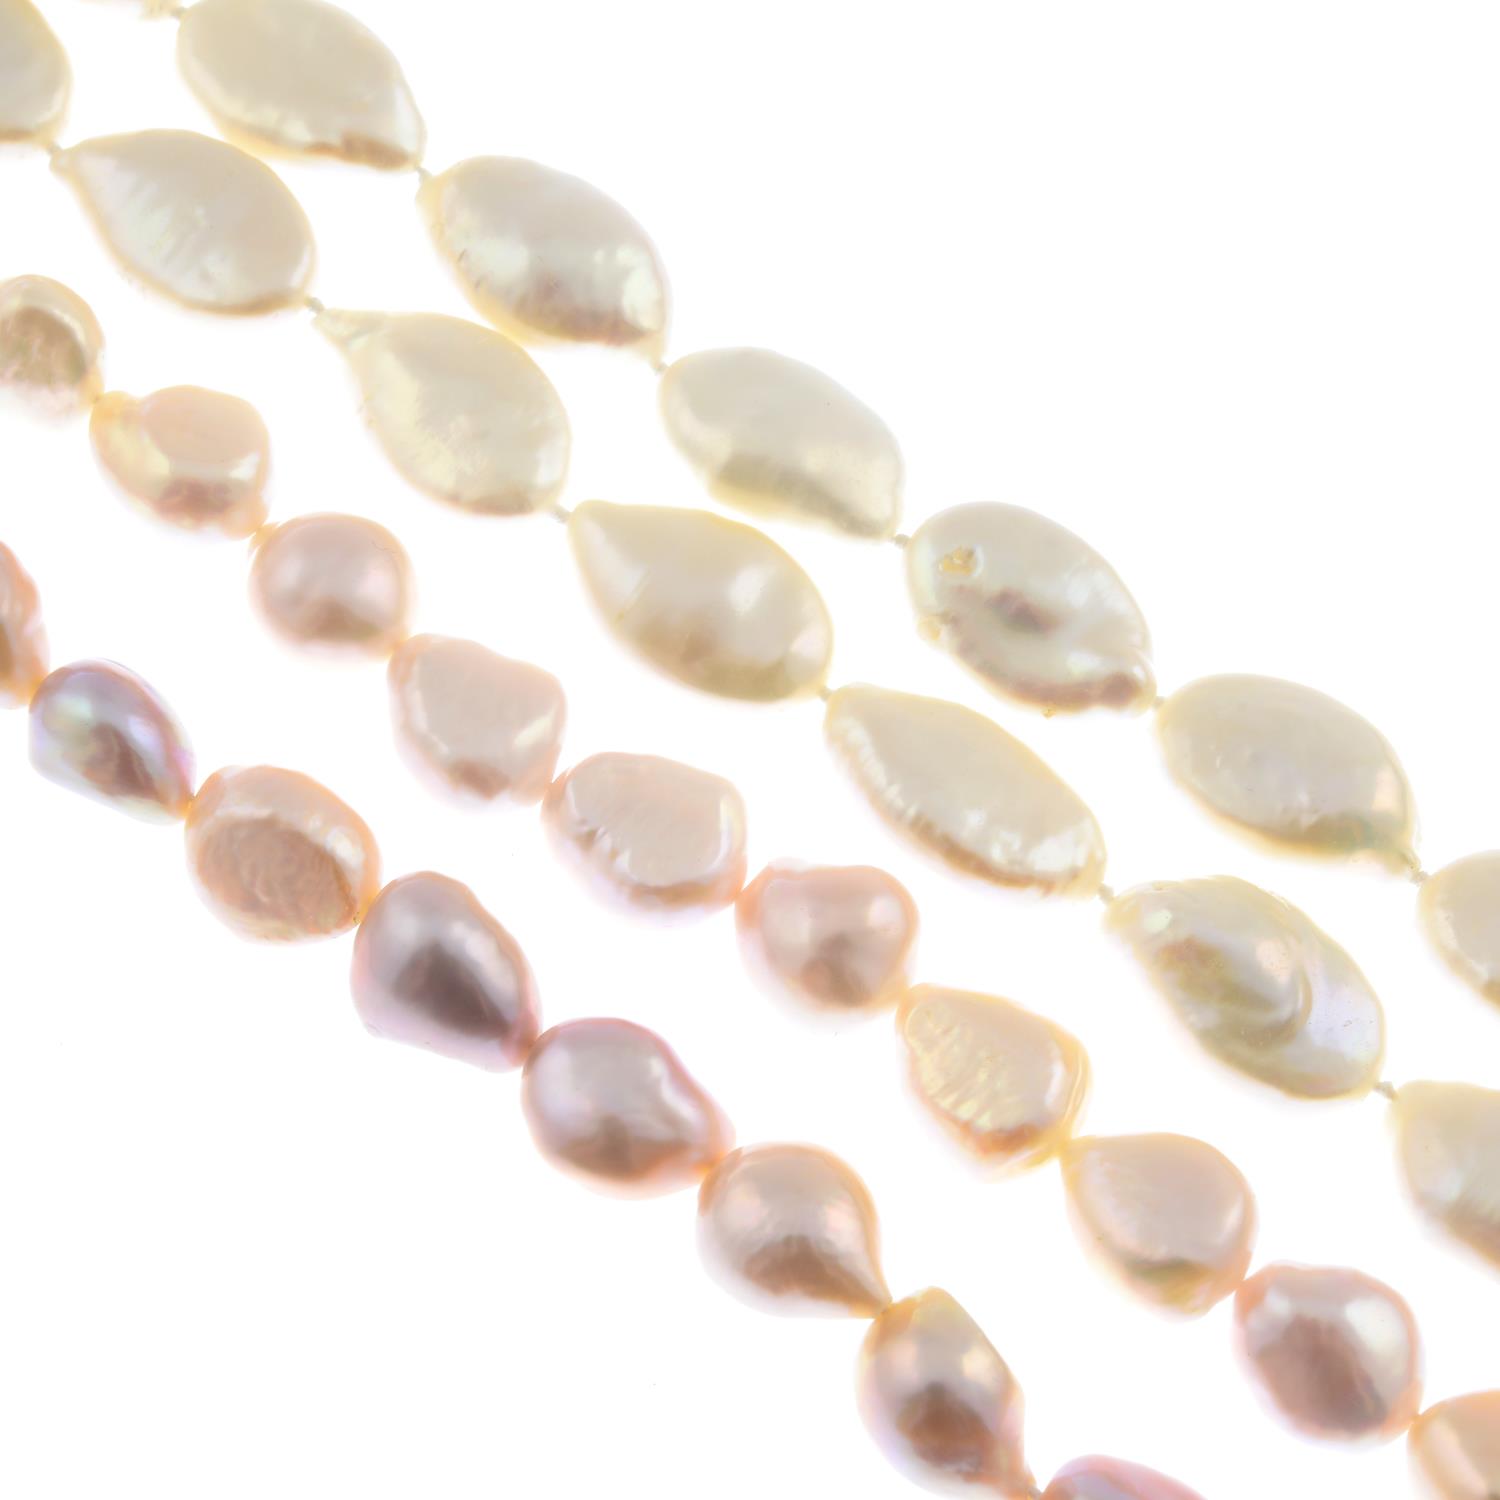 Eight pearl necklaces.